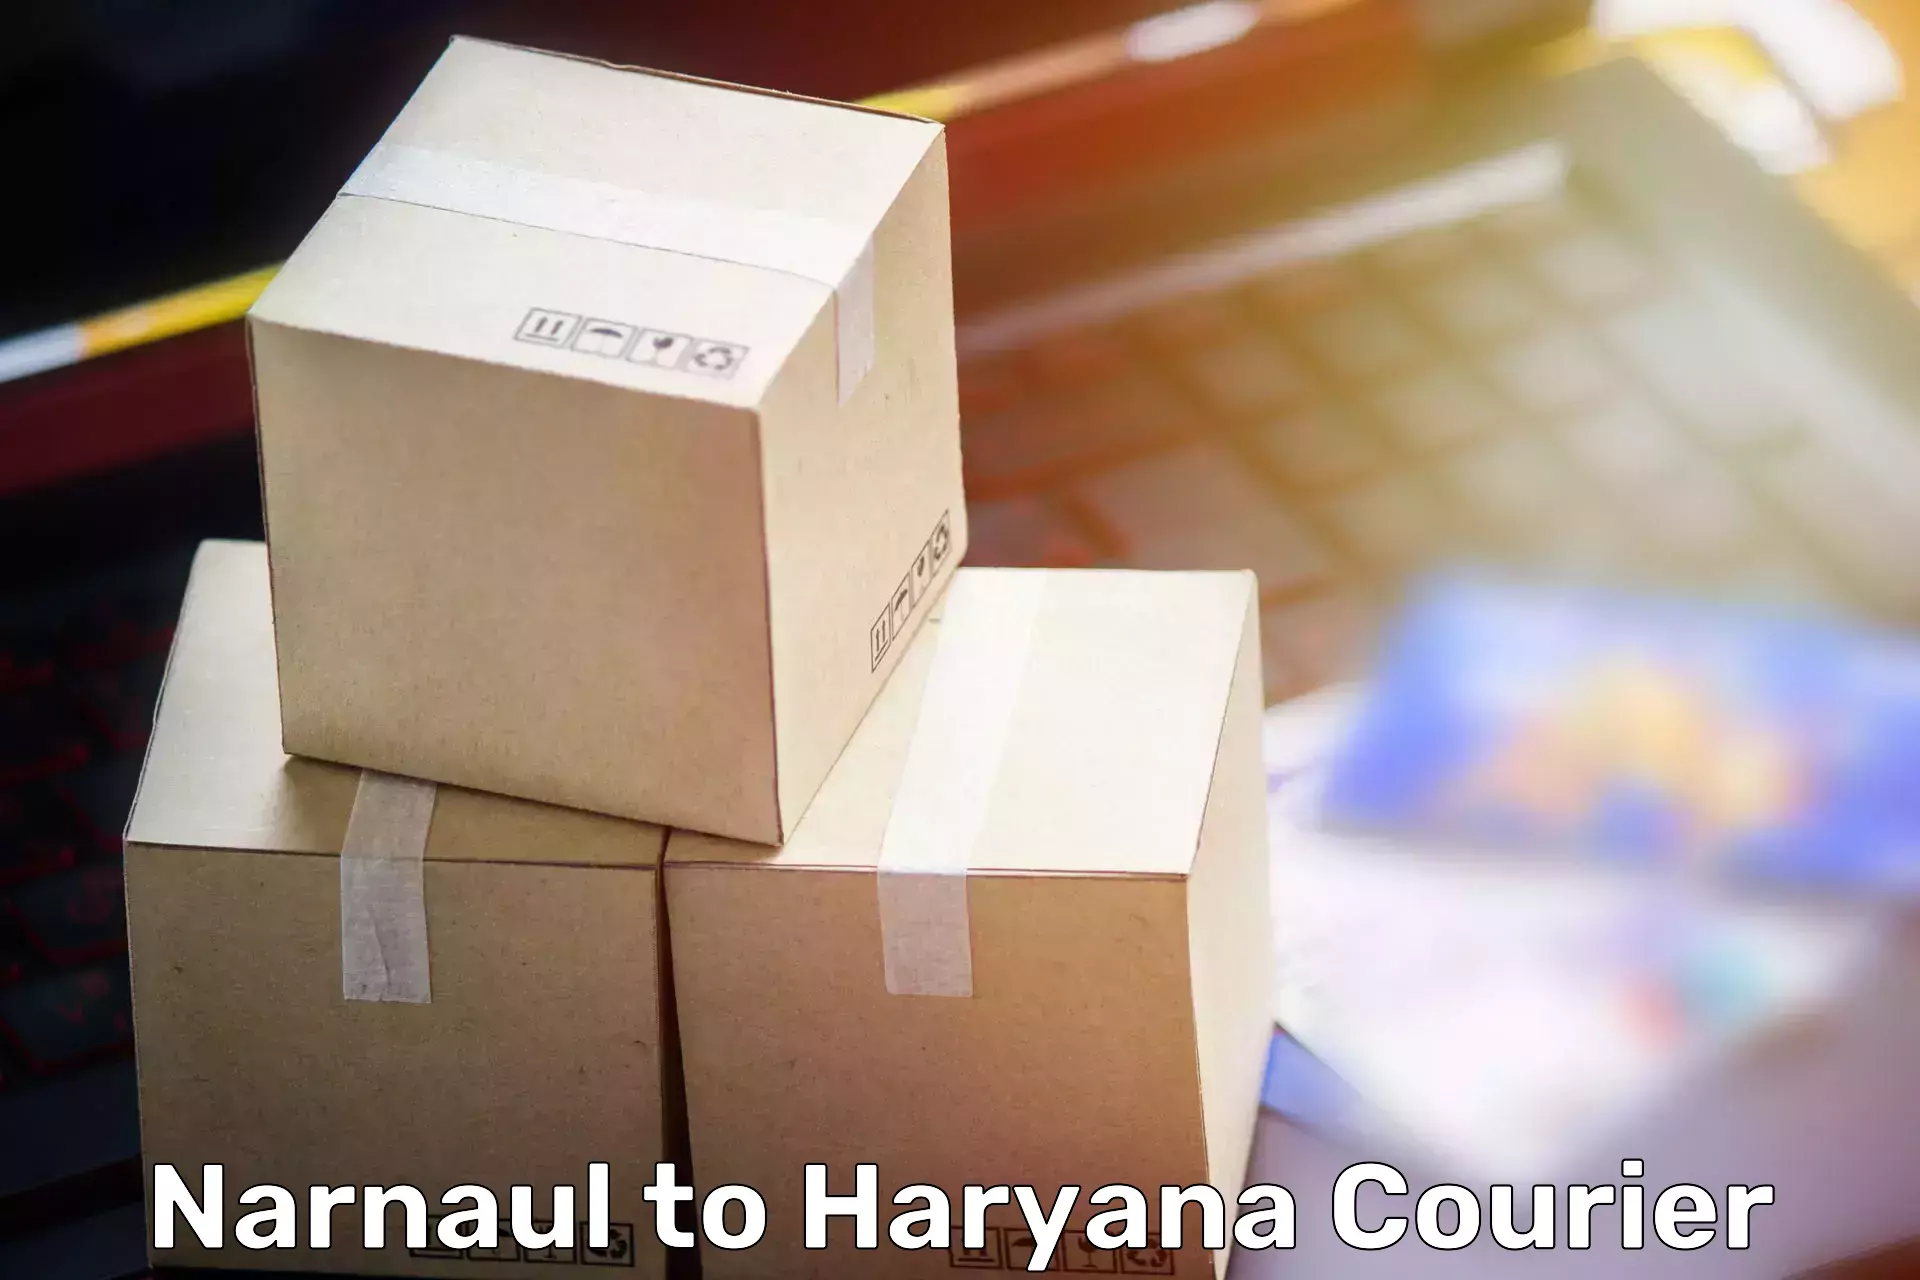 Furniture transport specialists Narnaul to Faridabad